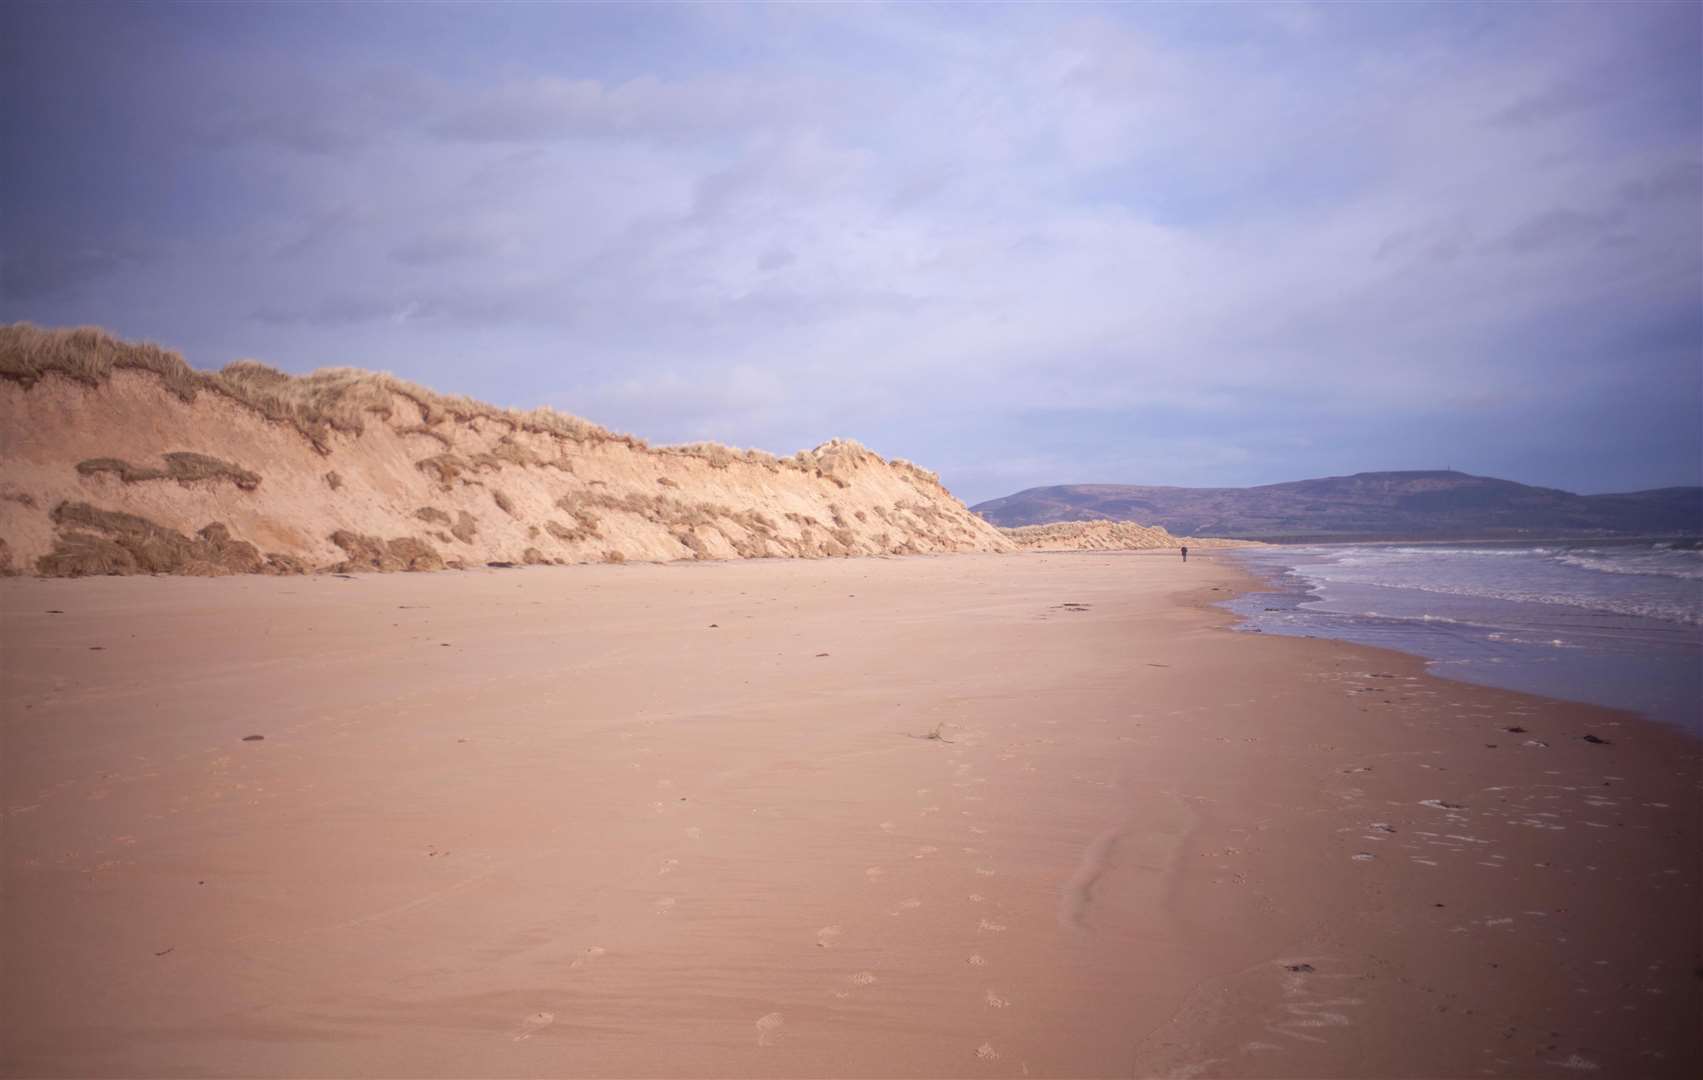 A high dune cliff is said to now extend north from the Embo slipway to near the mouth of Loch Fleet. Picture: Not Coul